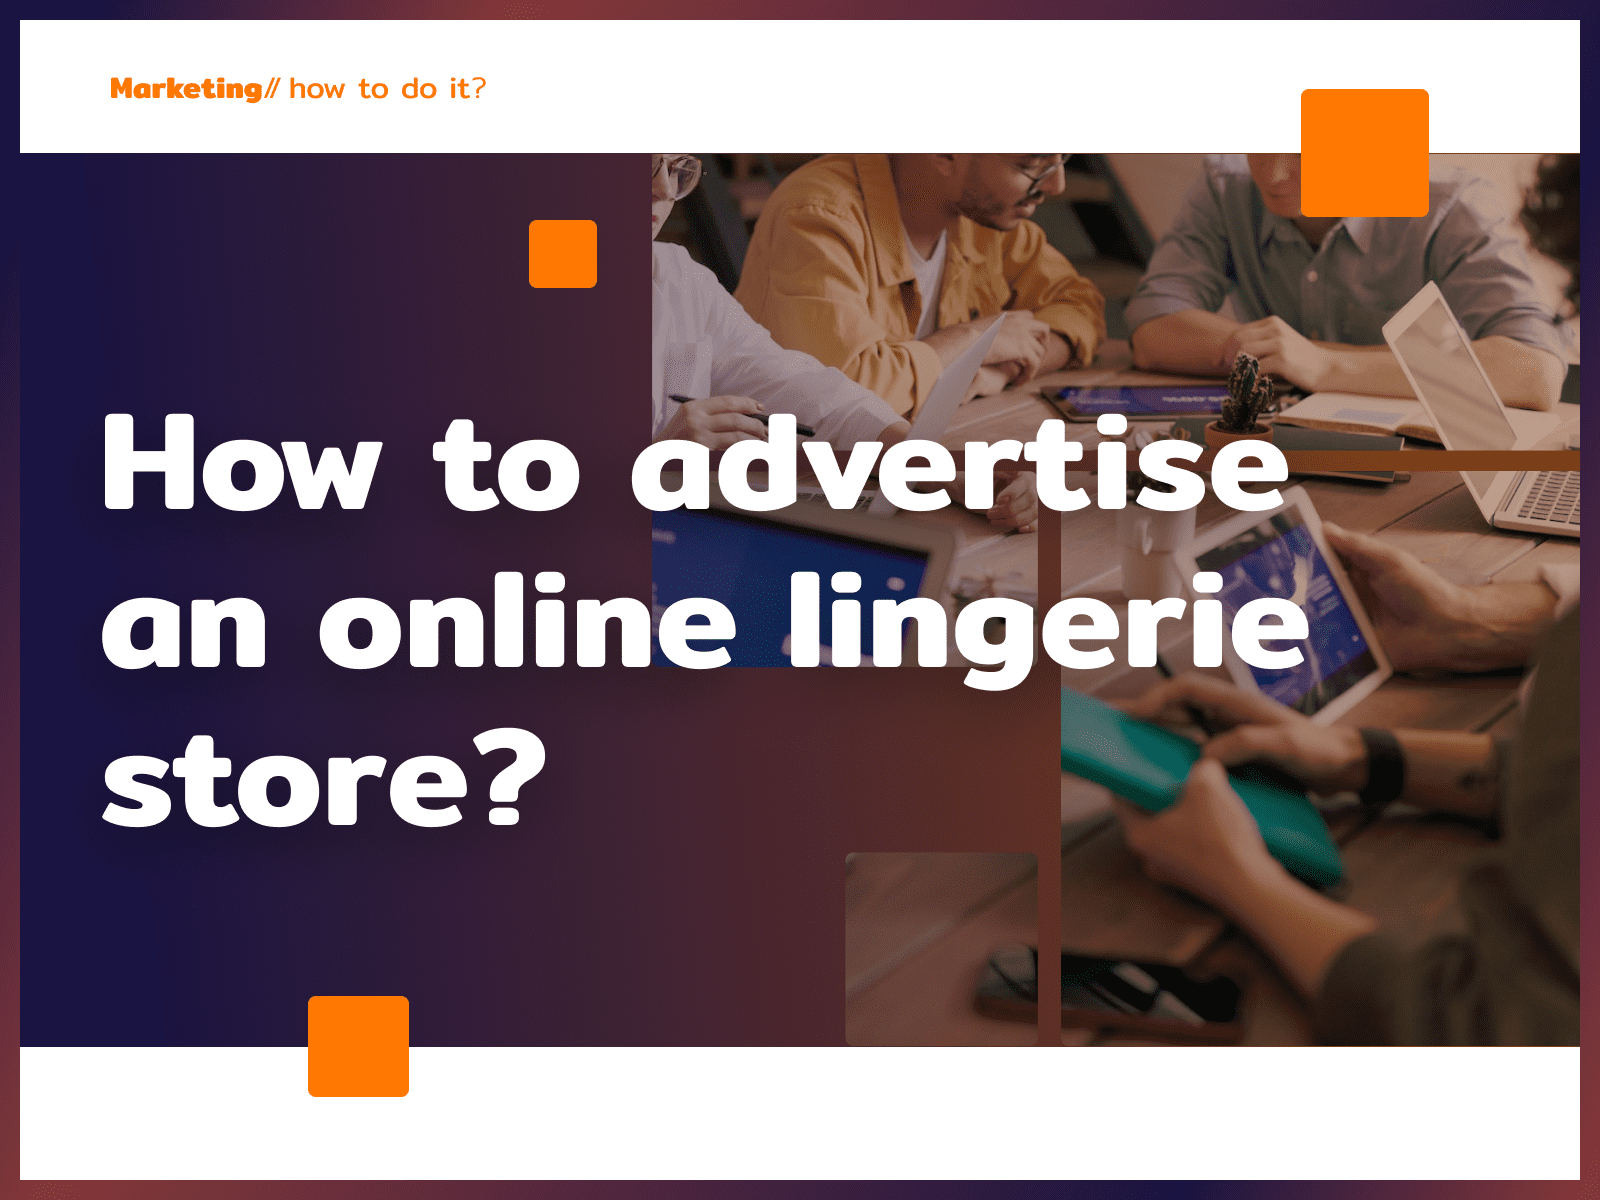 How to advertise an online lingerie store?